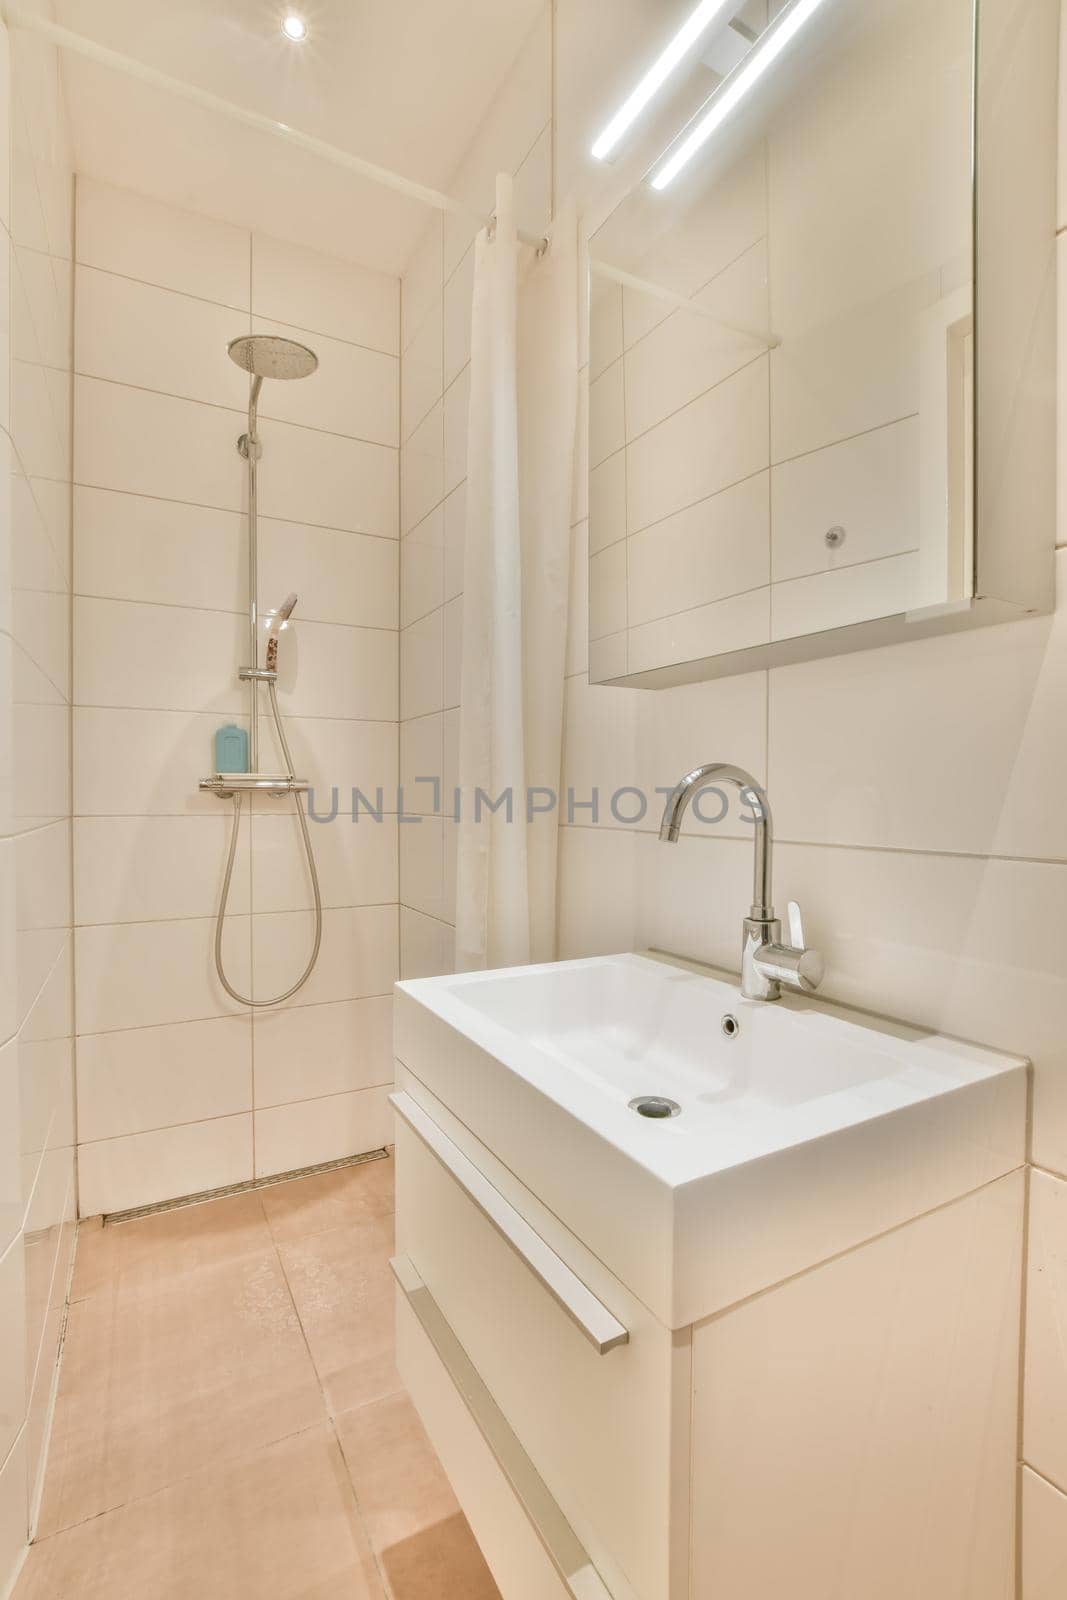 Bathroom interior with ceramic sink and shower surrounded by white tiles